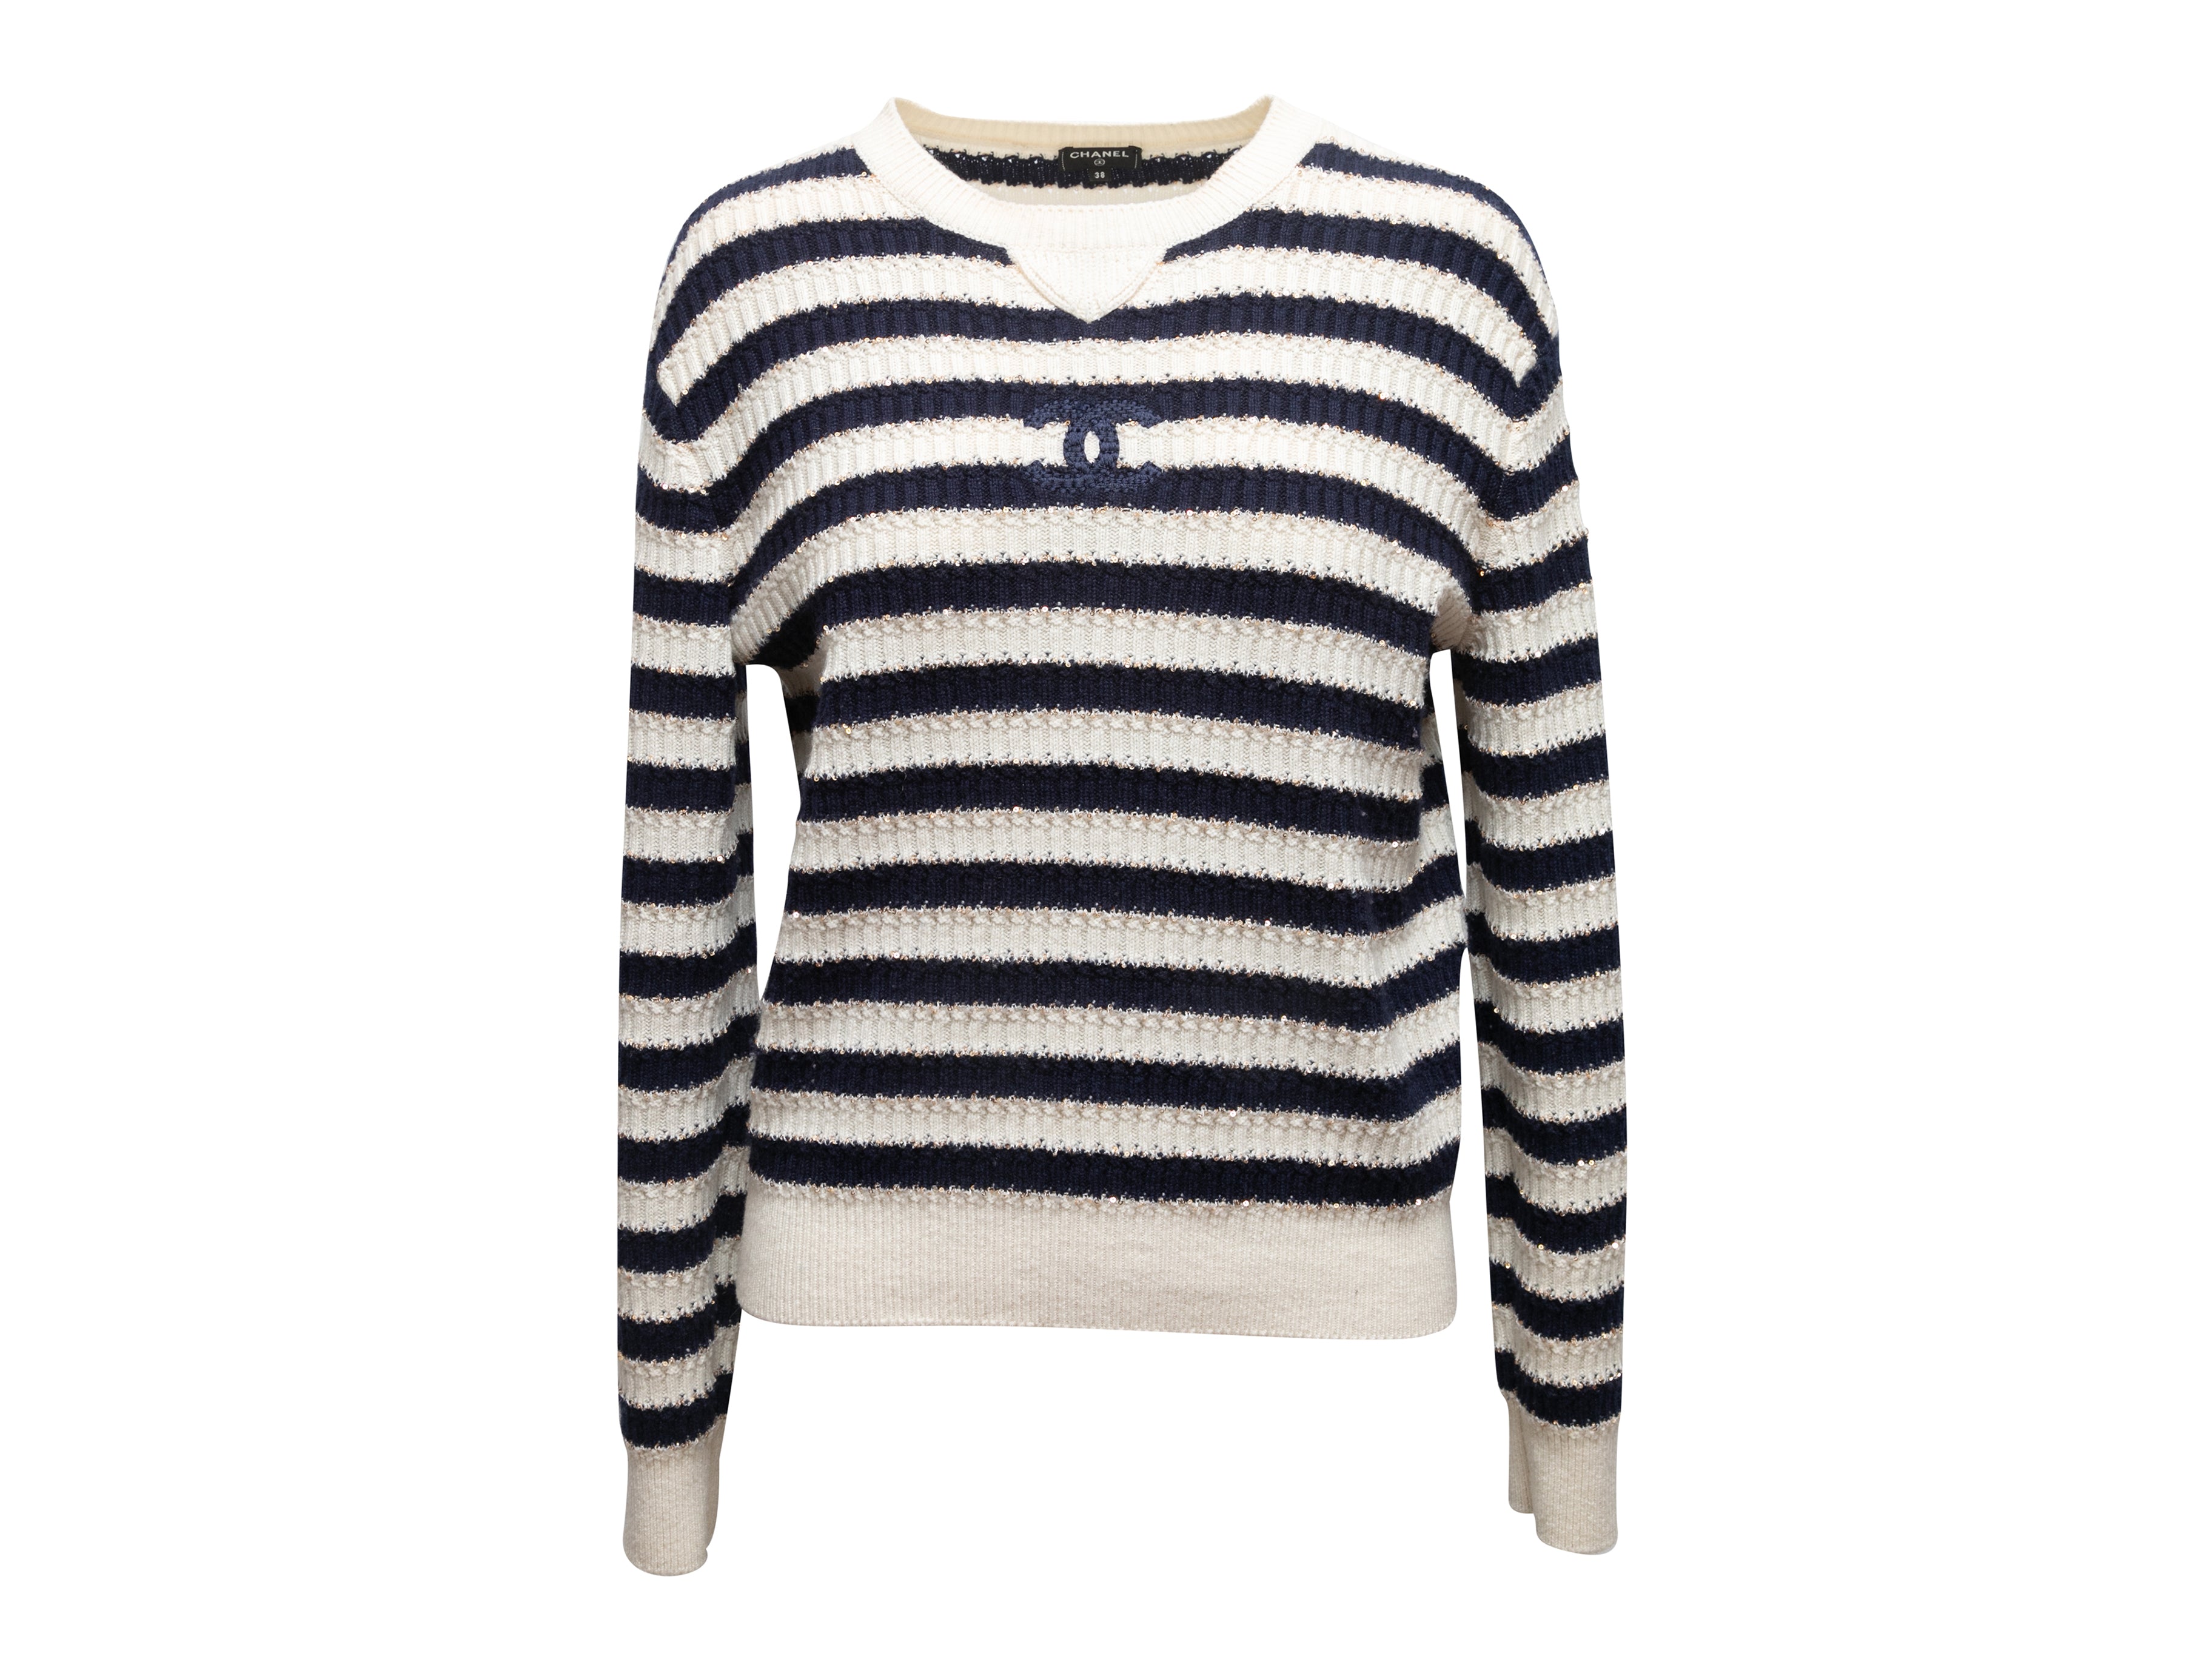 Navy & White Chanel Cruise 2021 Striped Cashmere Sweater Size FR 38